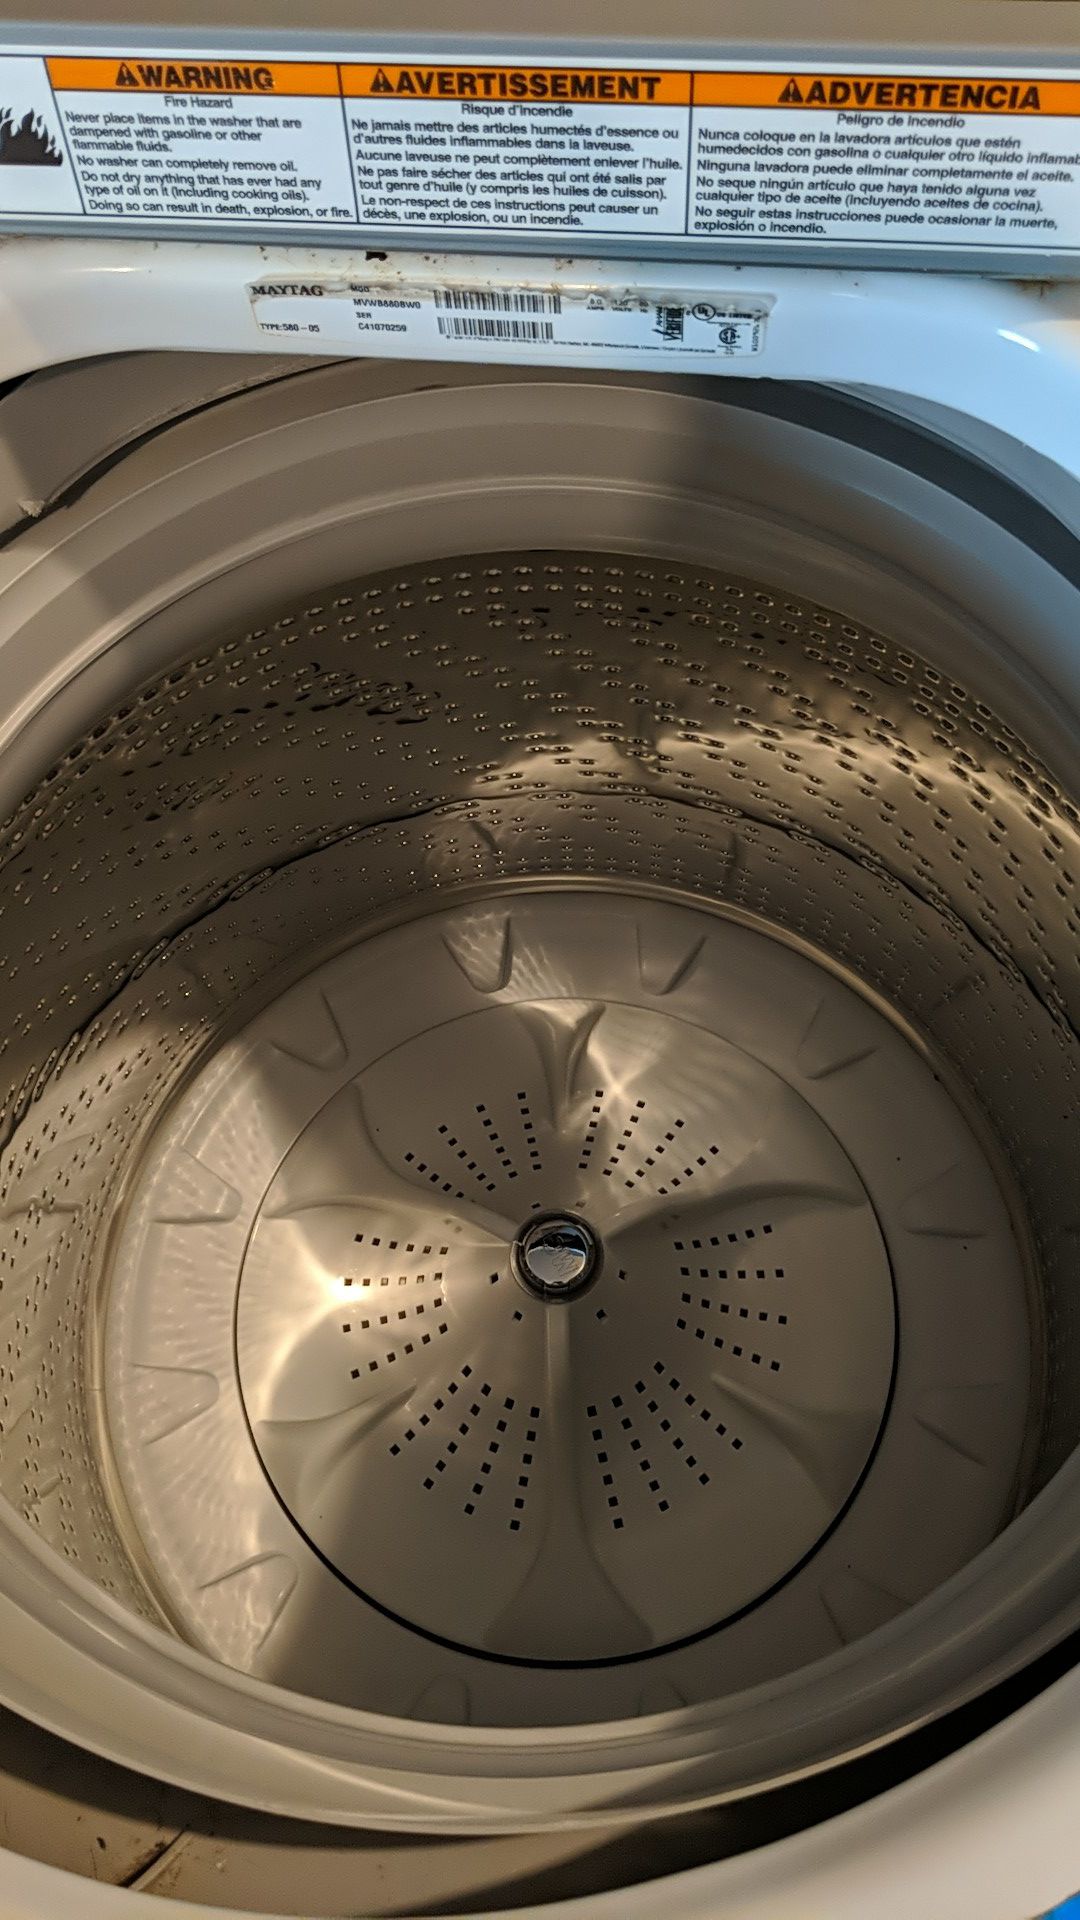 Bravo's XL Maytag washer. Uneven load code